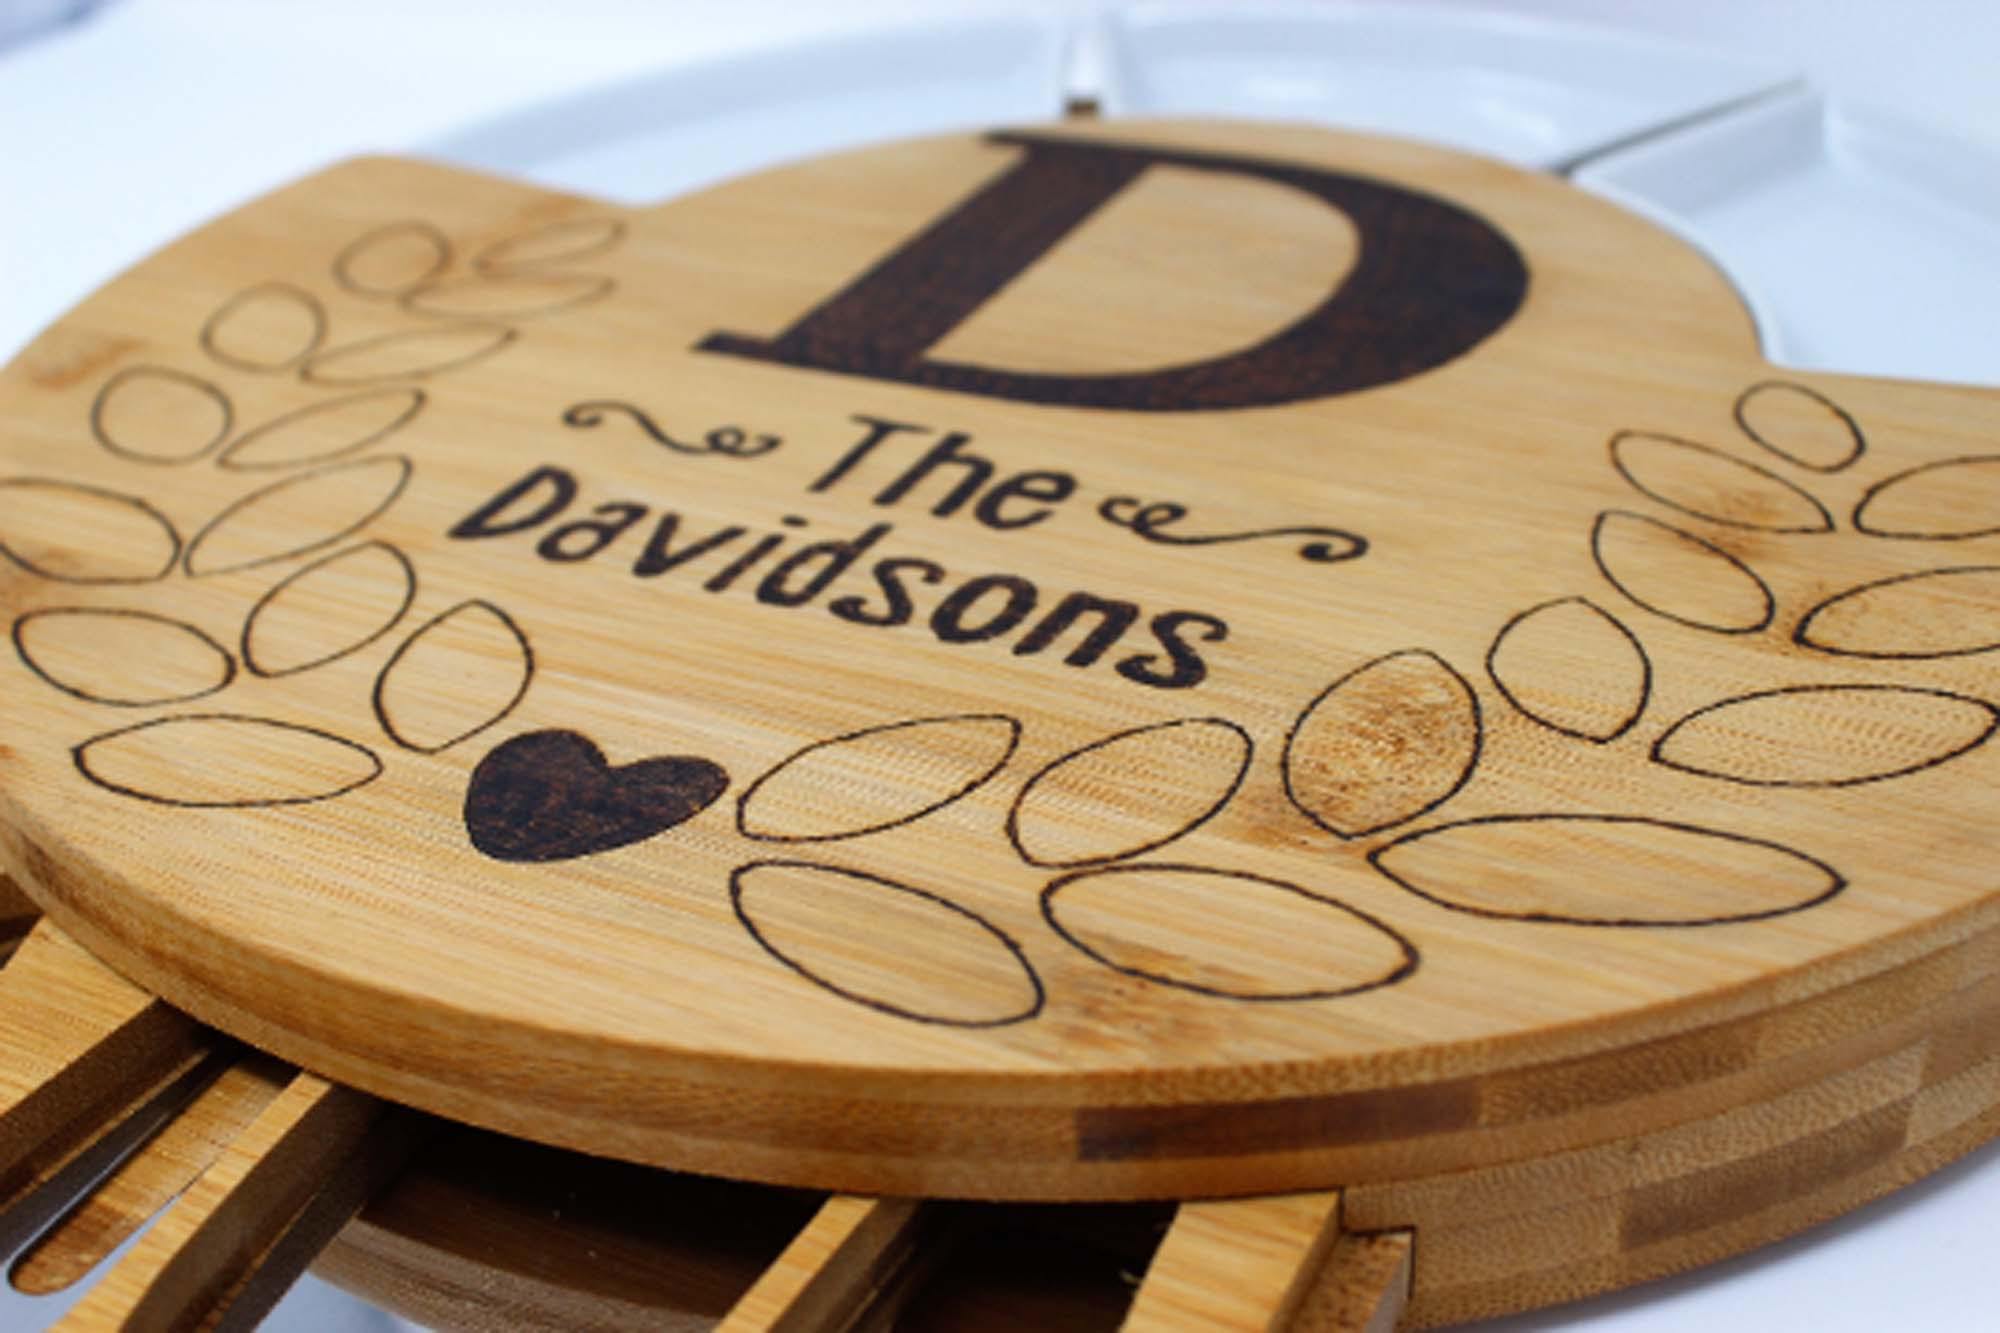 Monogrammed Cheese board | Personalized Cheese Board Set | Custom Cheese Board | Wooden Cheese Board | Charcuterie Board | Round - This & That Solutions - Monogrammed Cheese board | Personalized Cheese Board Set | Custom Cheese Board | Wooden Cheese Board | Charcuterie Board | Round - Personalized Gifts & Custom Home Decor